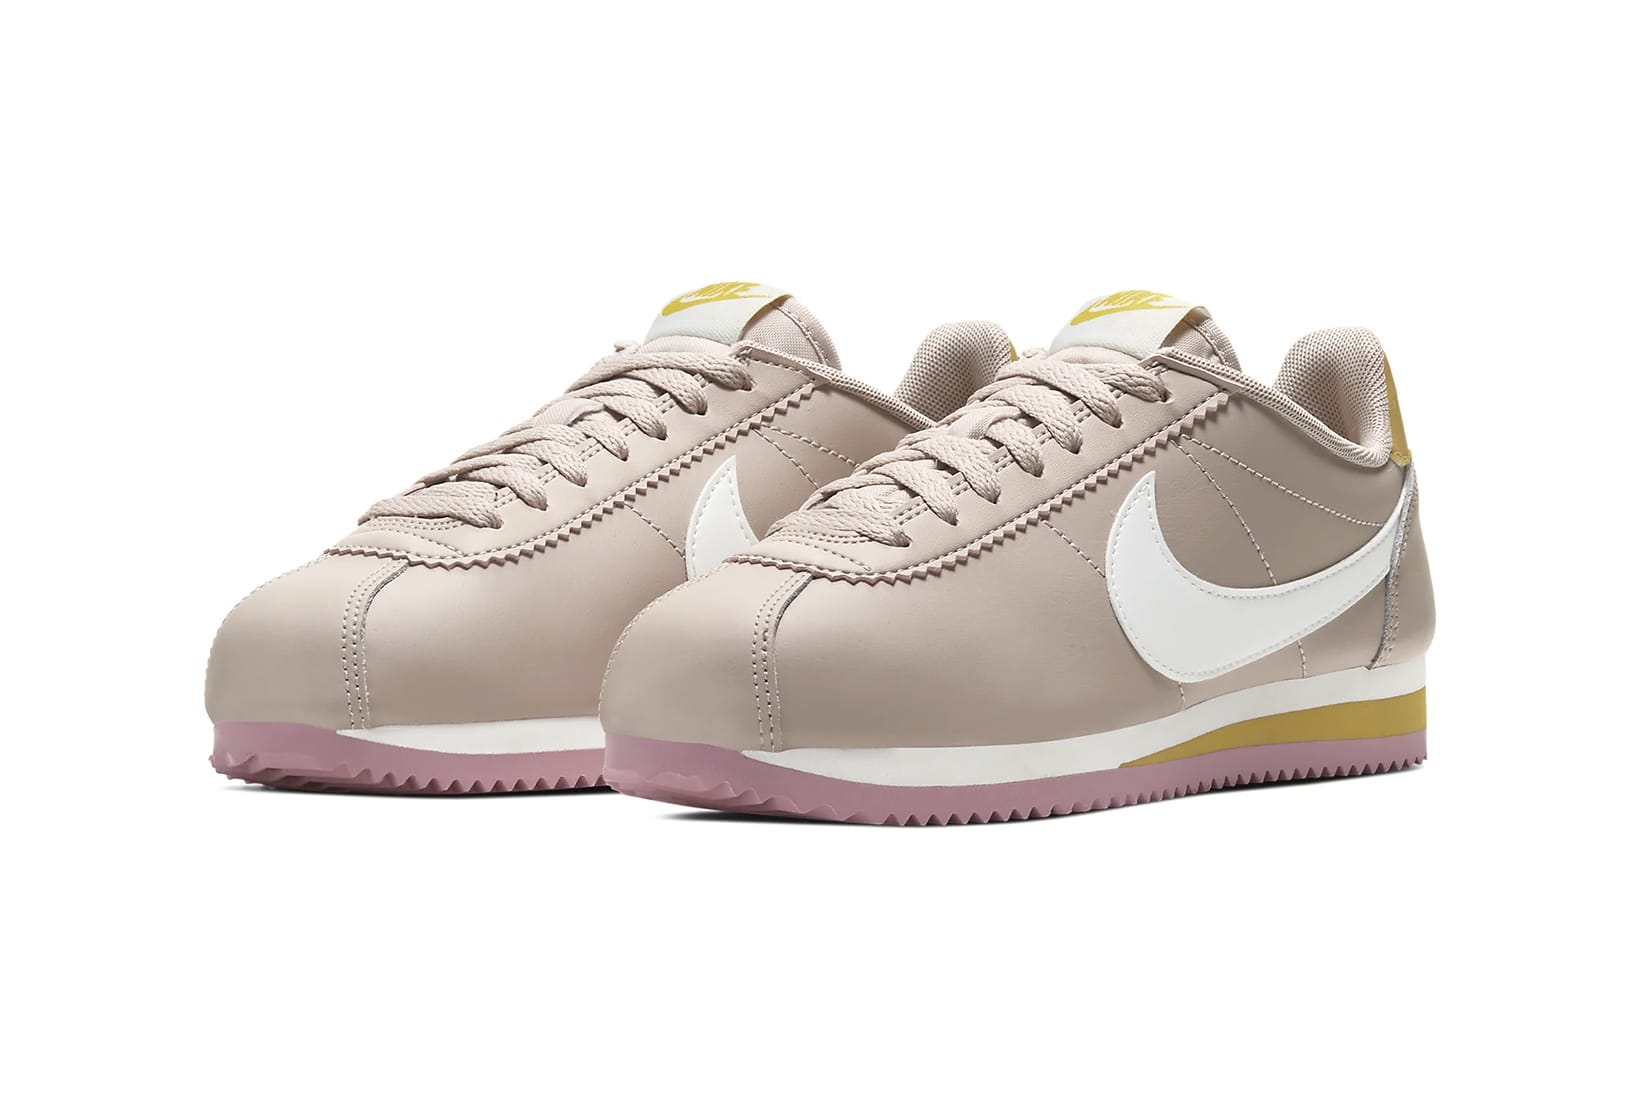 nike classic cortez leather pink